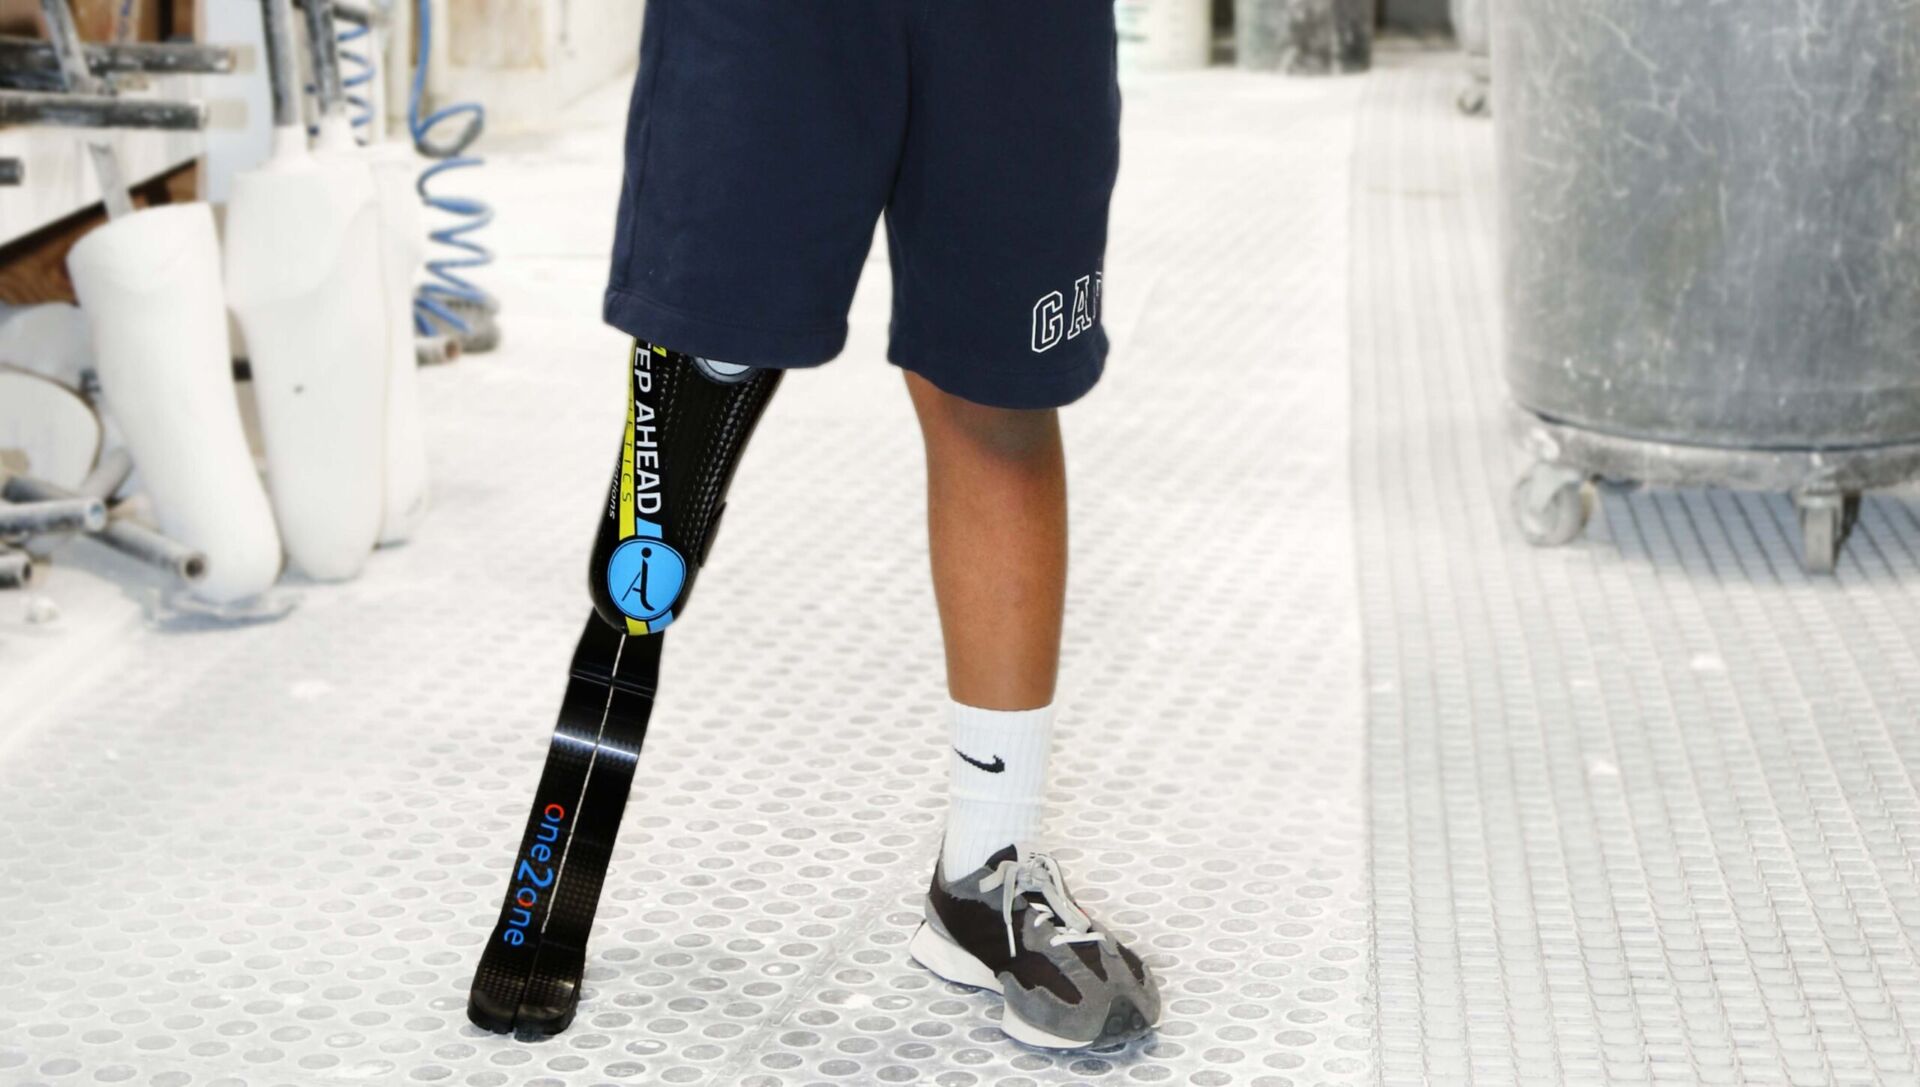 Pediatric below-knee Prosthetics! Our pediatric patients can grow stronger with improved mobility.